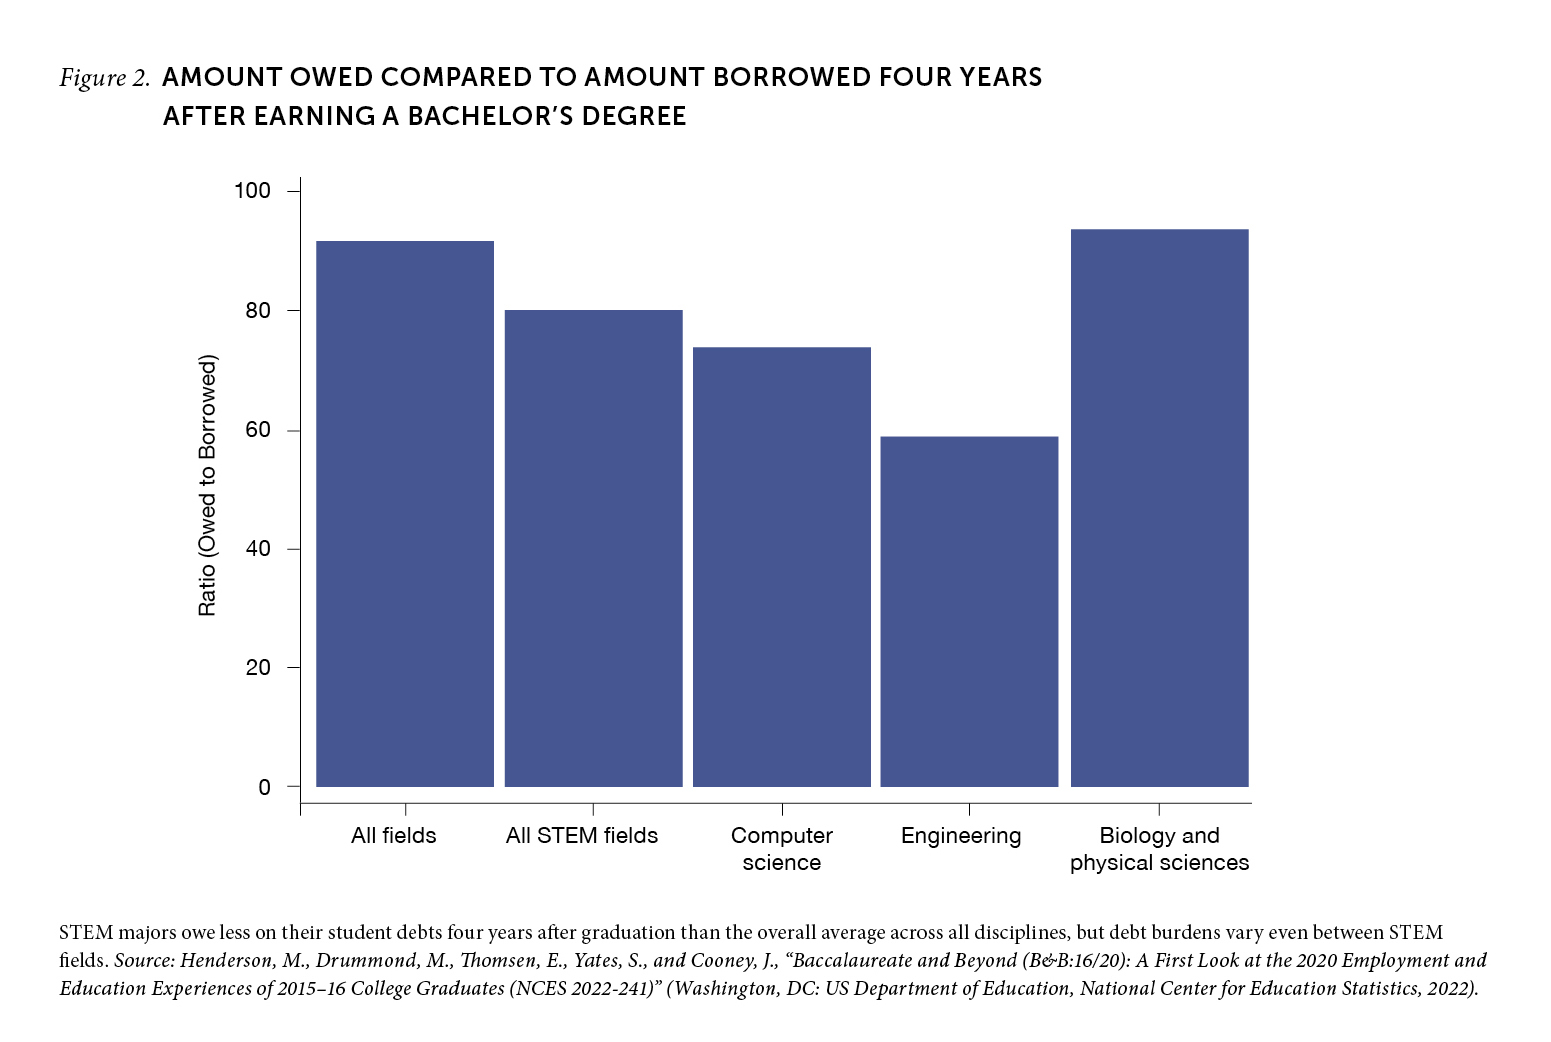 Figure 2. Amount owed compared to amount borrowed four years after earning a bachelor’s degree